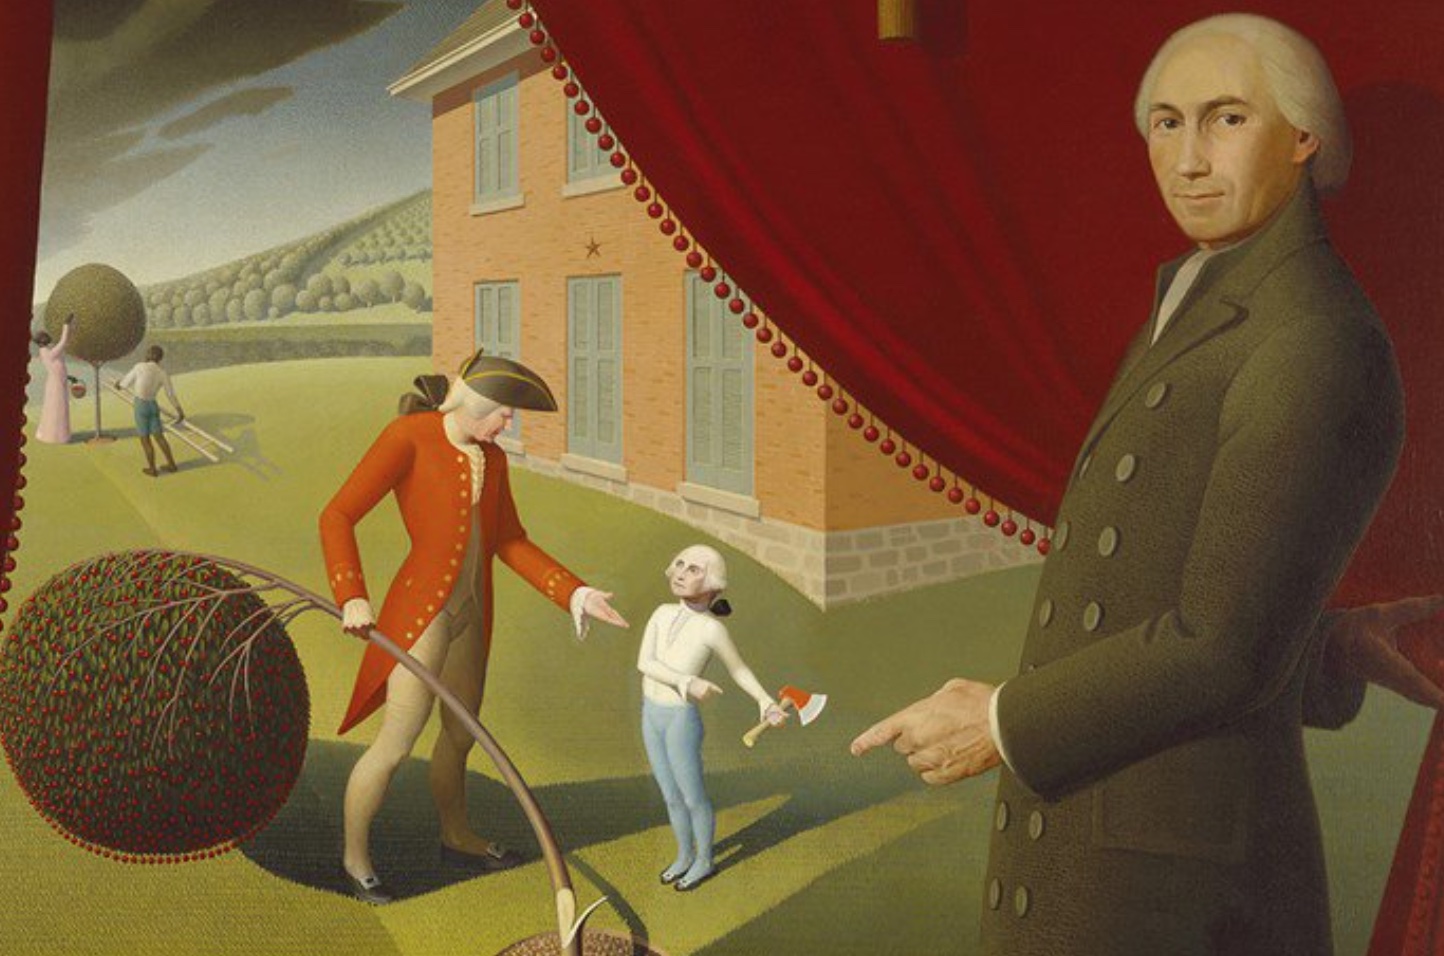 Painting depicting Parson Weems and his famous story of George Washington and the Cherry Tree; image by Grant Wood, Public domain, via Wikimedia Commons.